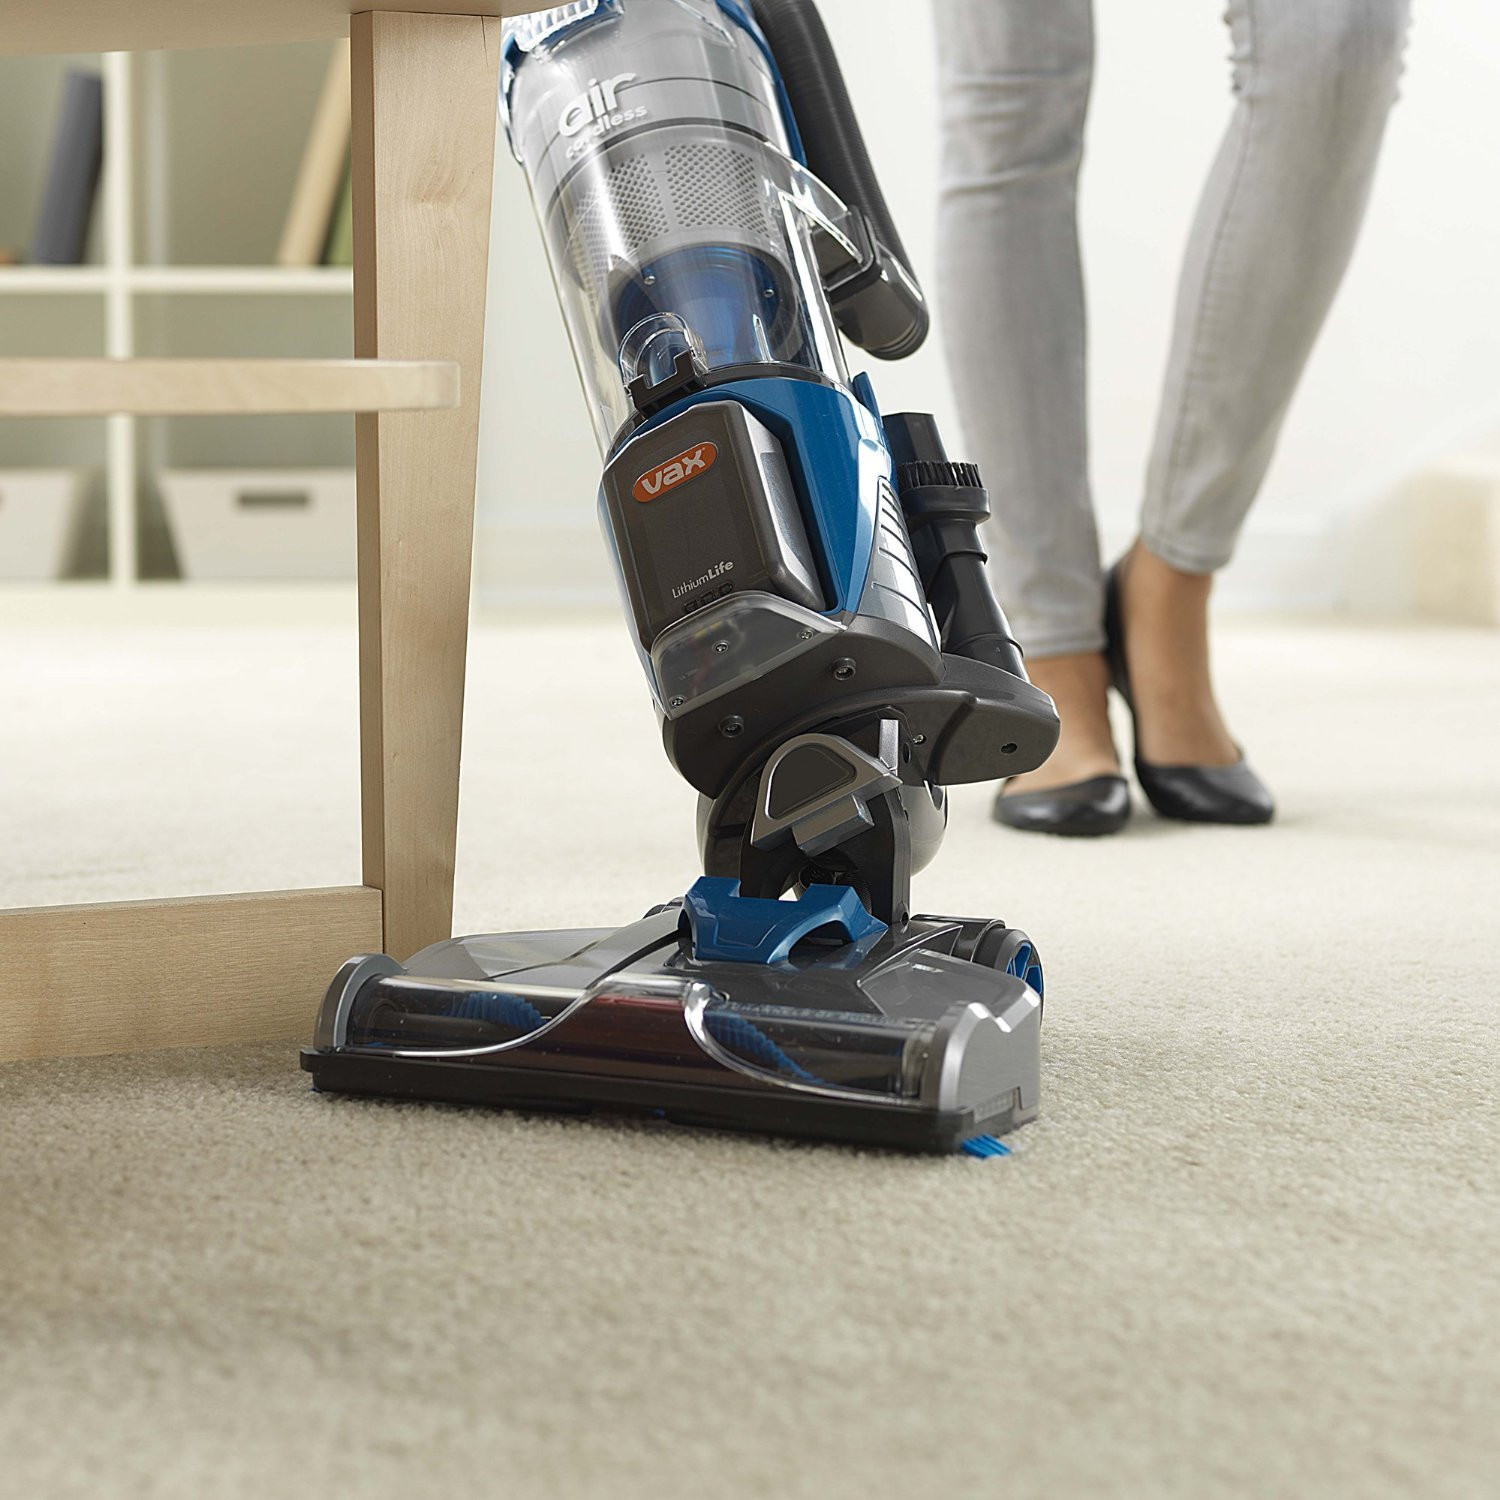 14 Wonderful Best Cordless Vacuum for Pet Hair and Hardwood Floors 2024 free download best cordless vacuum for pet hair and hardwood floors of benefits and disadvantages of using a cordless vacuum cleaners for regarding however if you want to utilize cordless technology in or